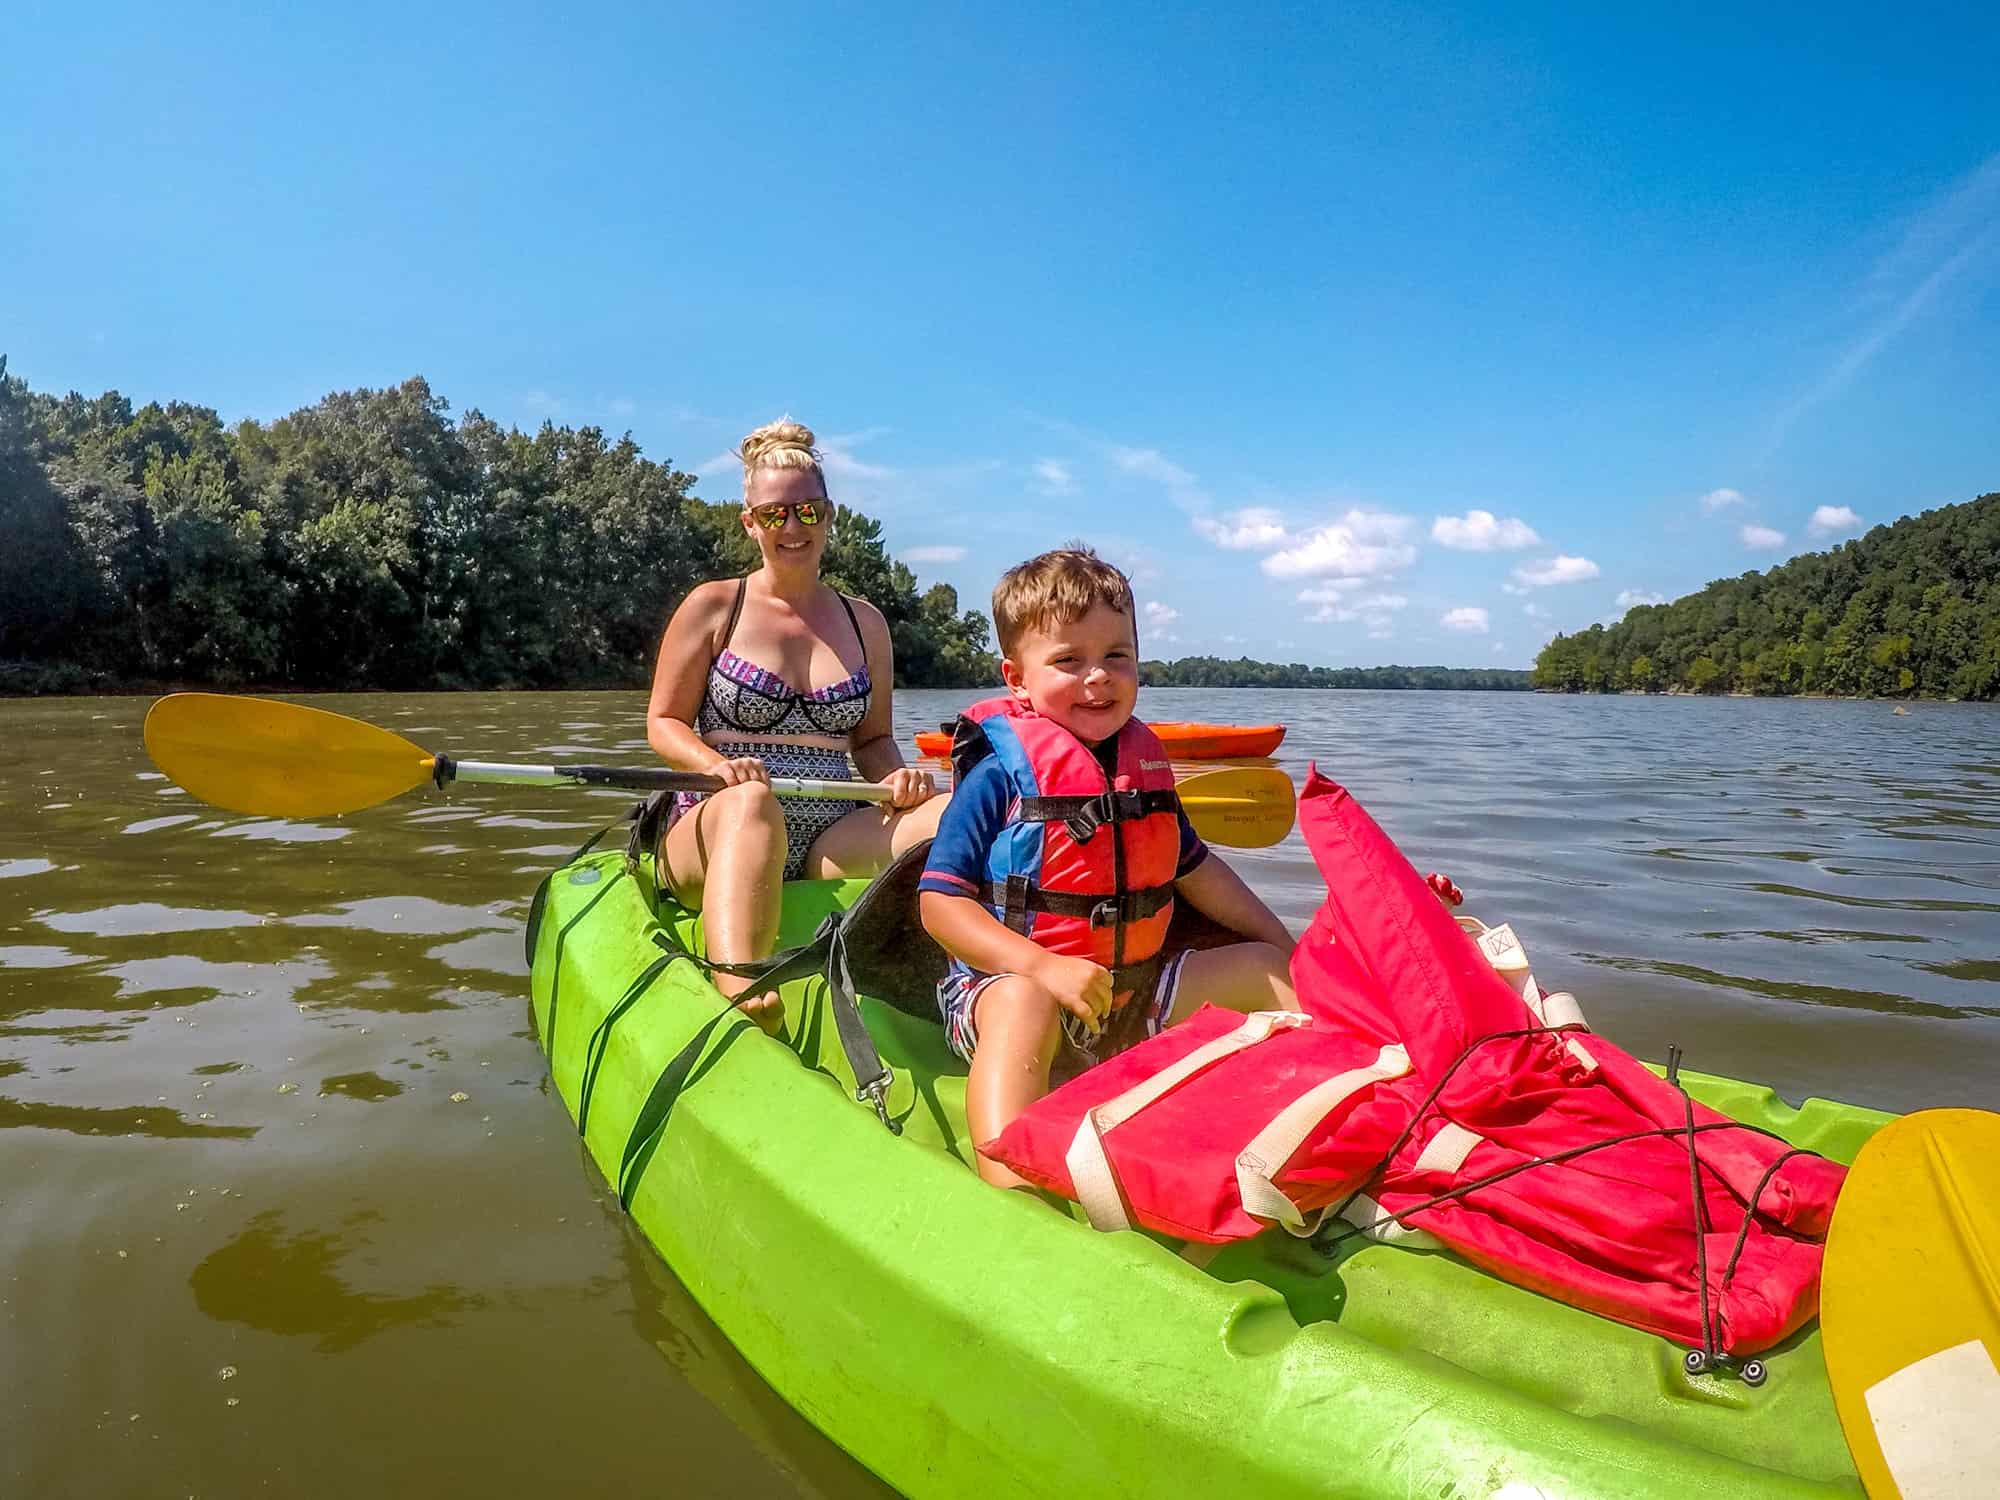 Youth Life Jackets - Recommended Styles and Sizes for Kids - Boater Kids